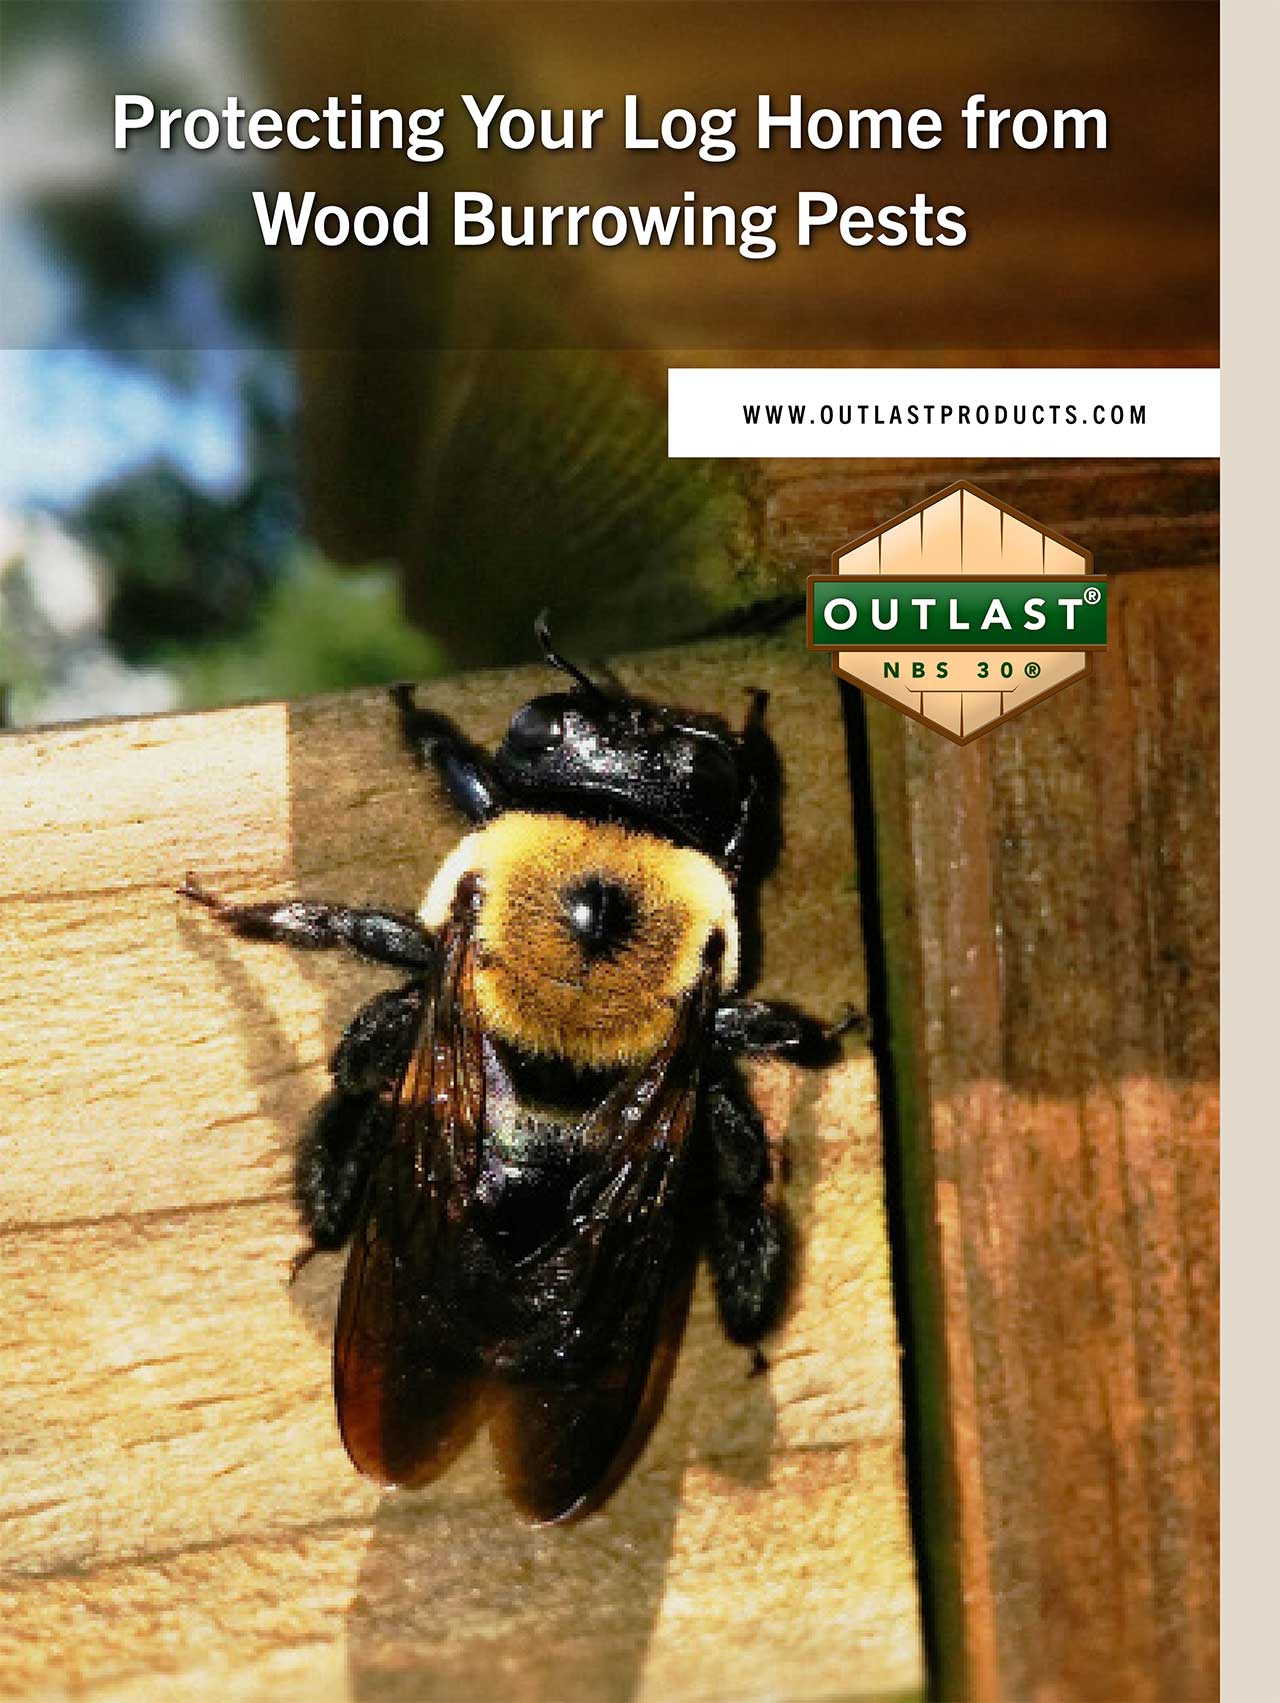 Outlast Complete NBS 30 eBook Protectng Your Log Home from Wood Burrowing Pests